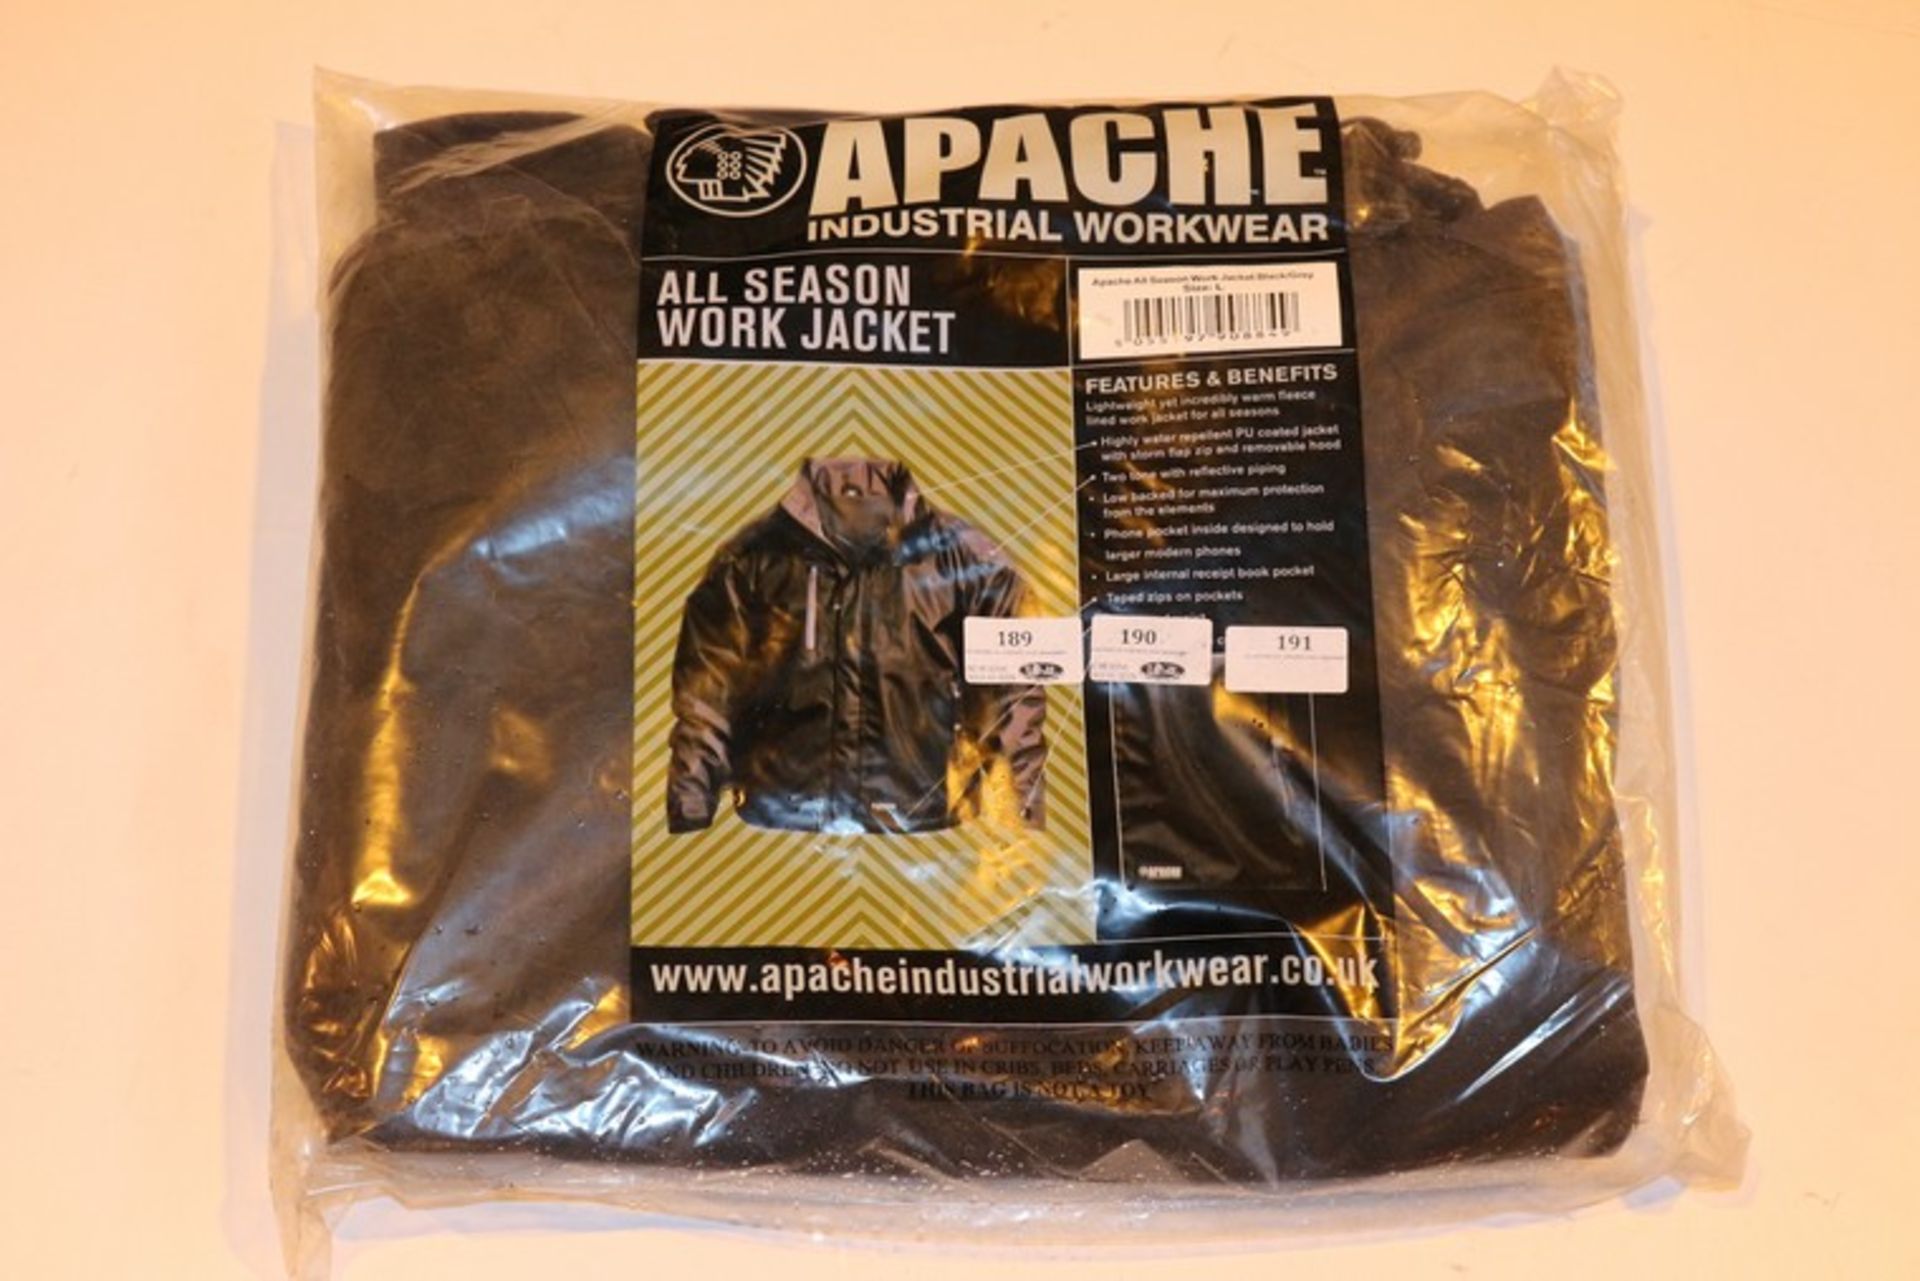 1 x BRAND NEW APACHE ALL SEASON WORK JACKET *PLEASE NOTE THAT THE BID PRICE IS MULTIPLIED BY THE